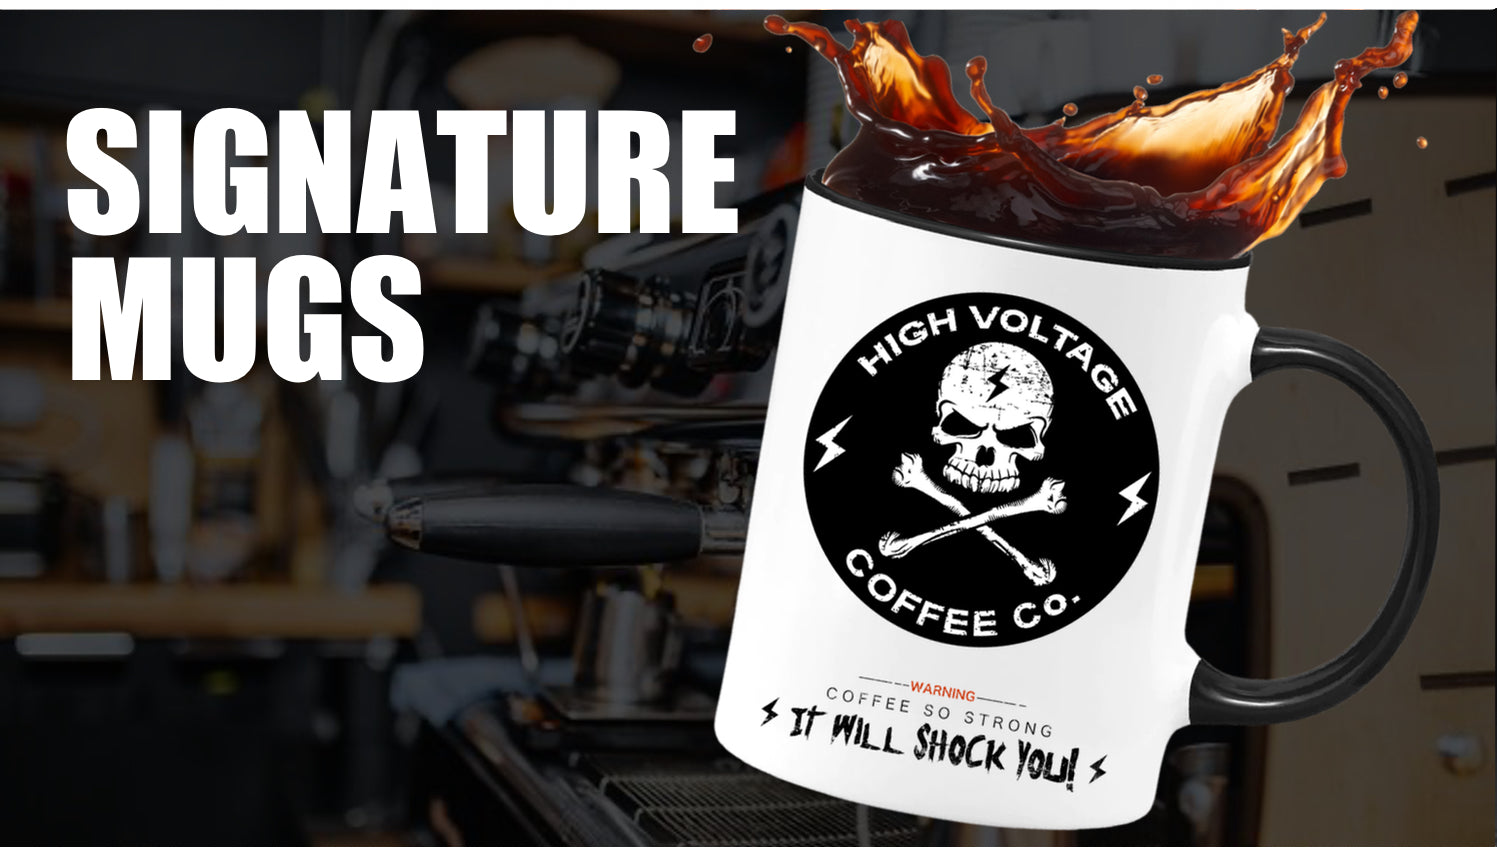 Promotional image for "signature mugs" featuring a white coffee mug labeled "high voltage coffee co." with a skull design, splashing coffee made from the strongest coffee beans in Australia. Coffee beans near me.